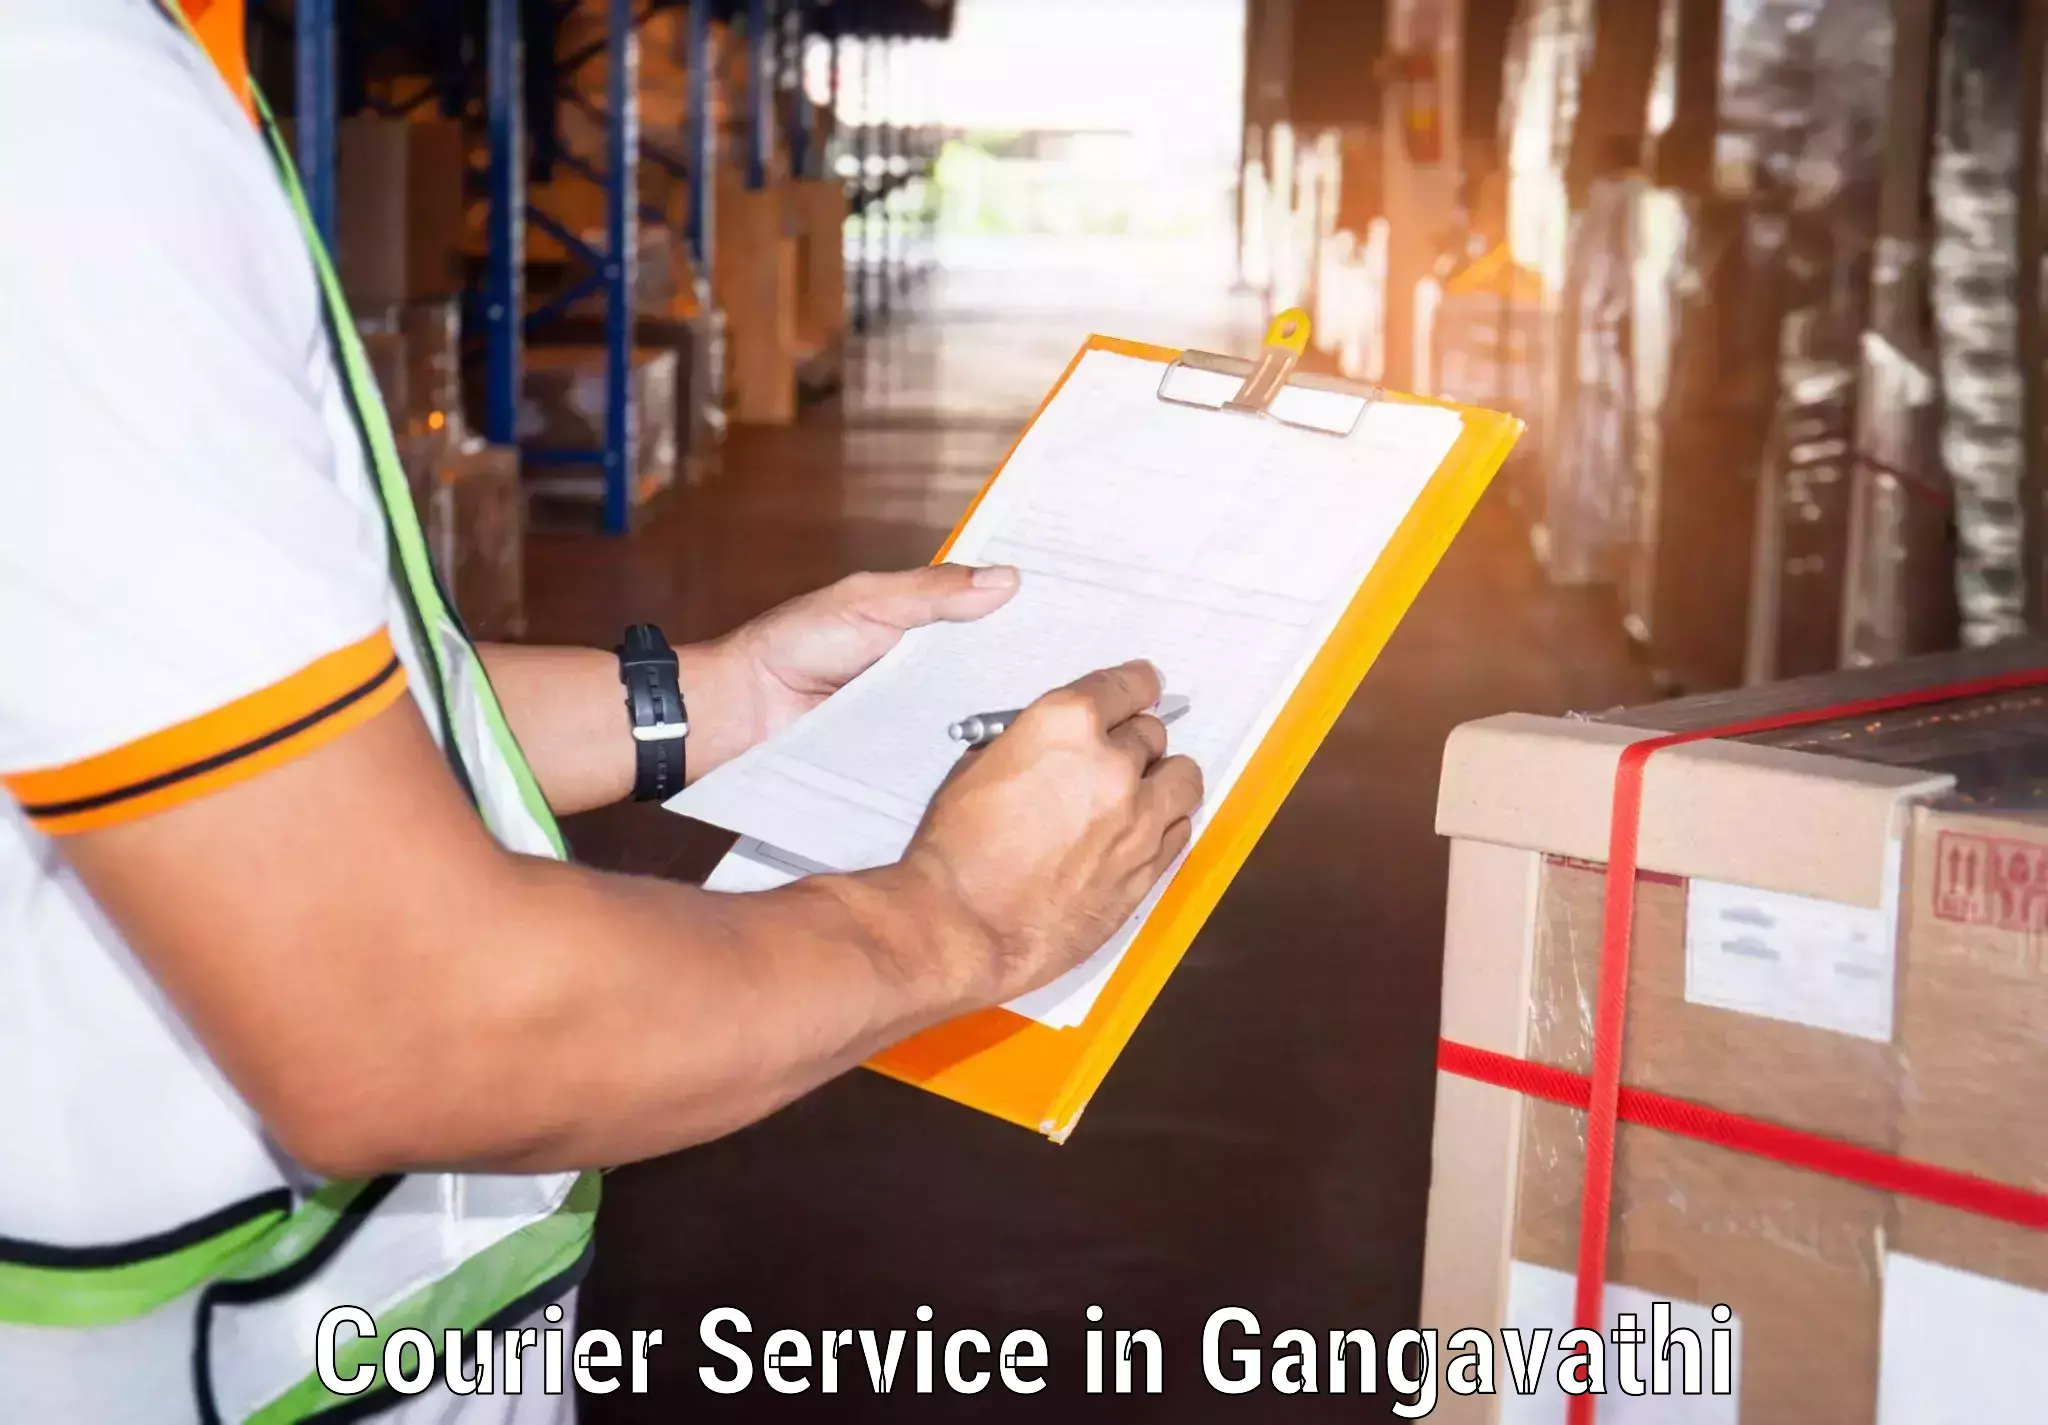 Overnight delivery services in Gangavathi